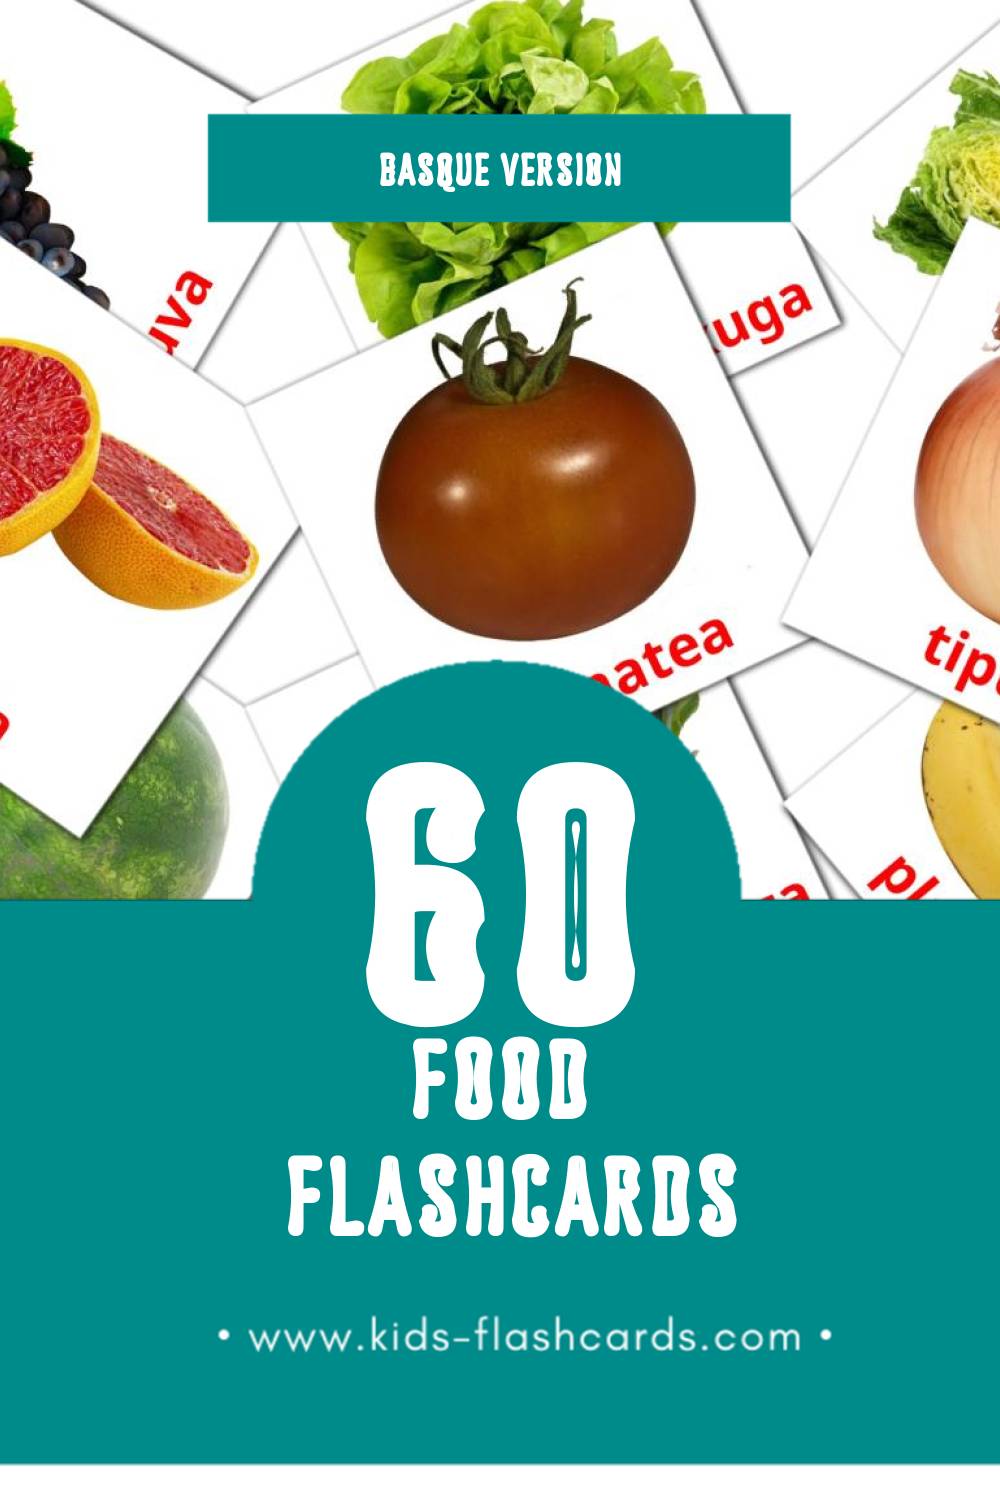 Visual Janaria Flashcards for Toddlers (49 cards in Basque)